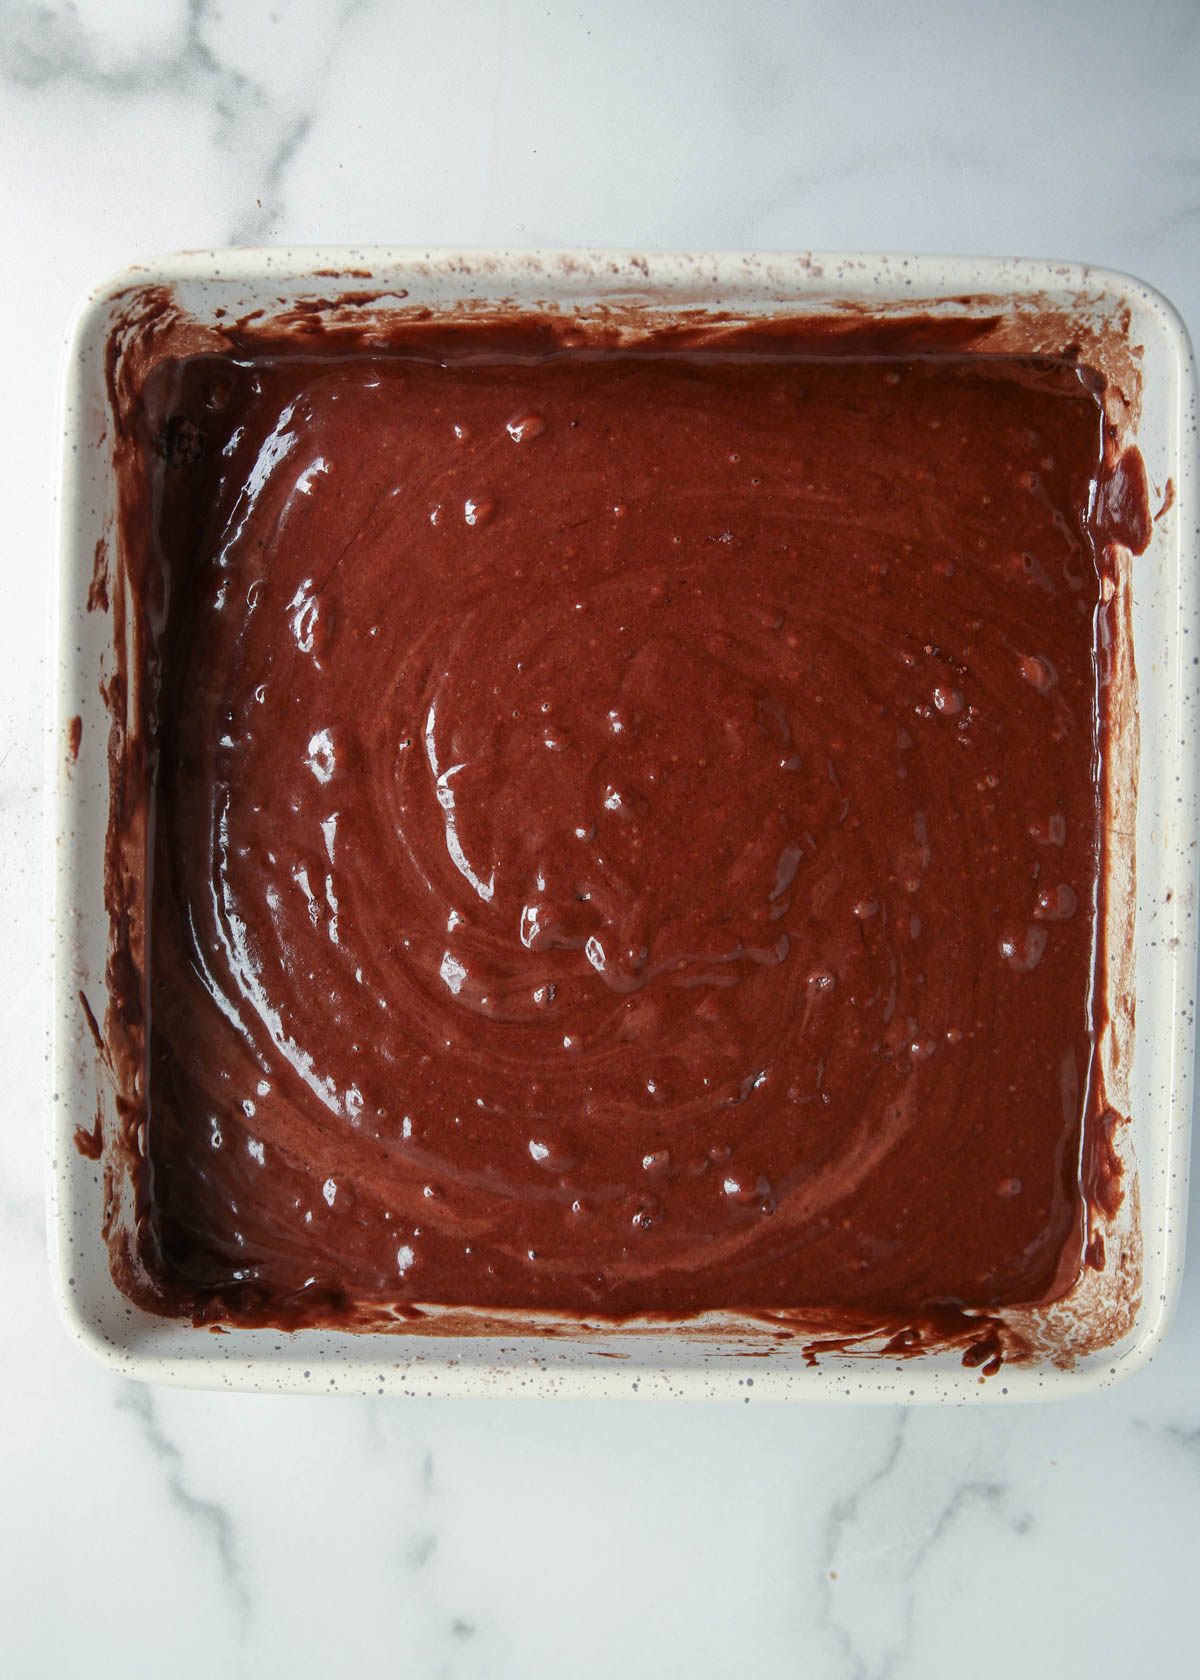 Batter for chocolate wacky cake in a white metal square pan.